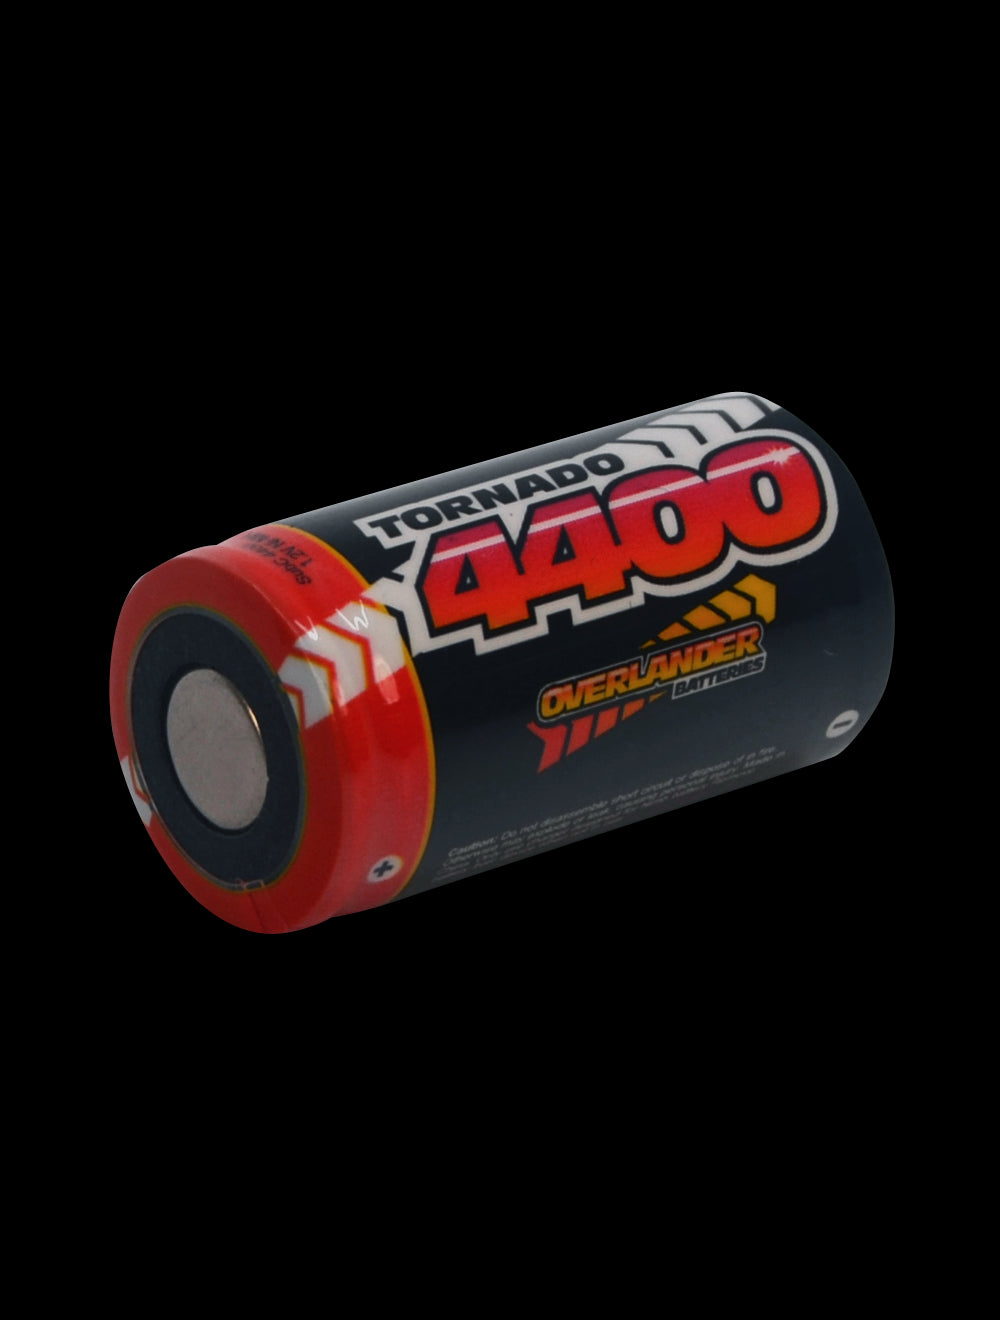 Overlander SubC 4400mah 1.2v Nimh Cell - Tagged 3132